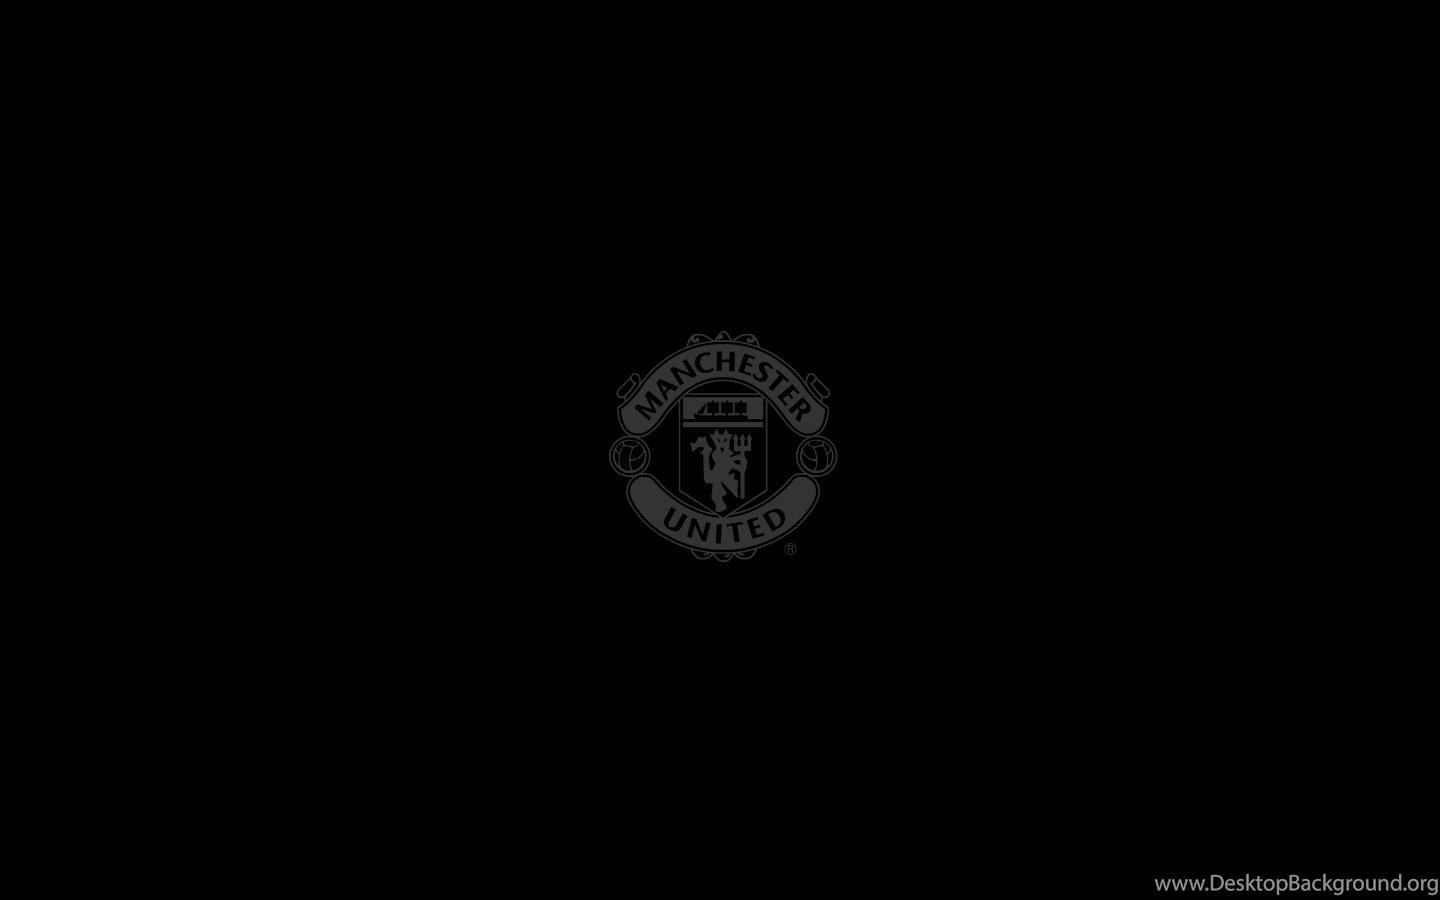 View Wallpaper High Resolution Man United Logo Images